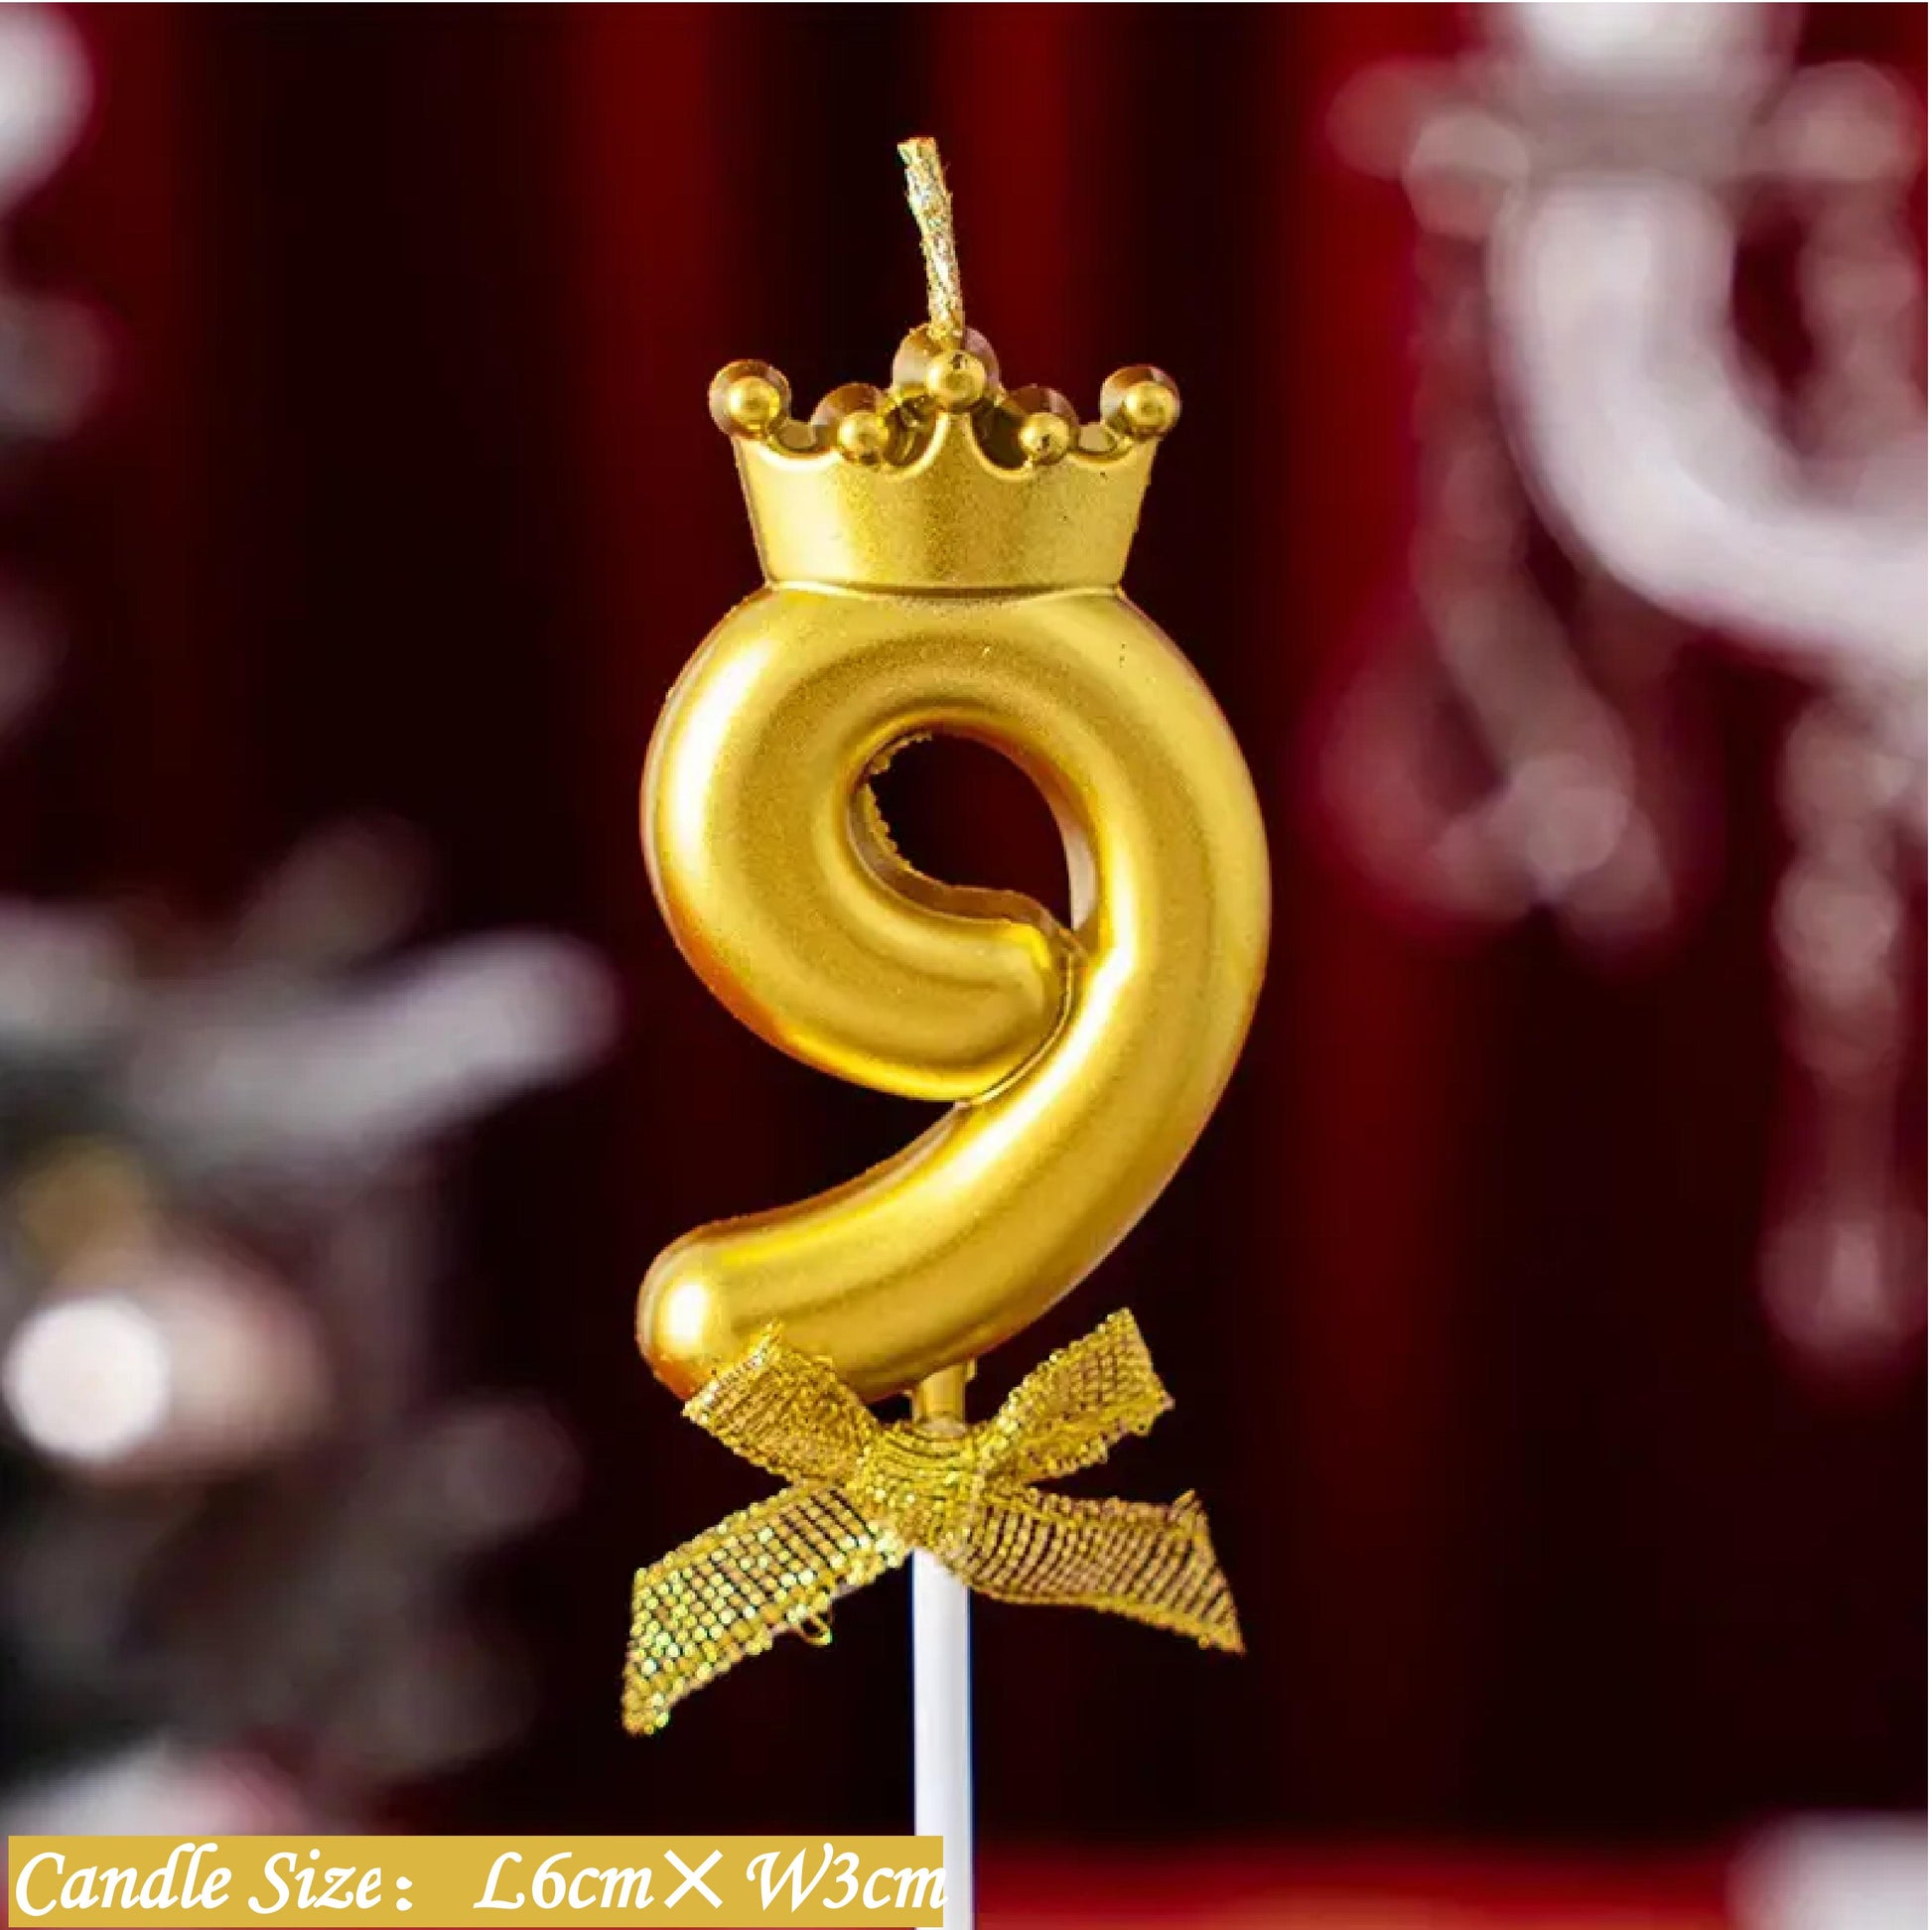 0-9 Number Birthday Candles, Number Candles With Crown And Bow Decorations, Cake Decorations, Number Candles For Birthday Cakes, Weddings, Anniversaries, Graduations, Holidays, Parties